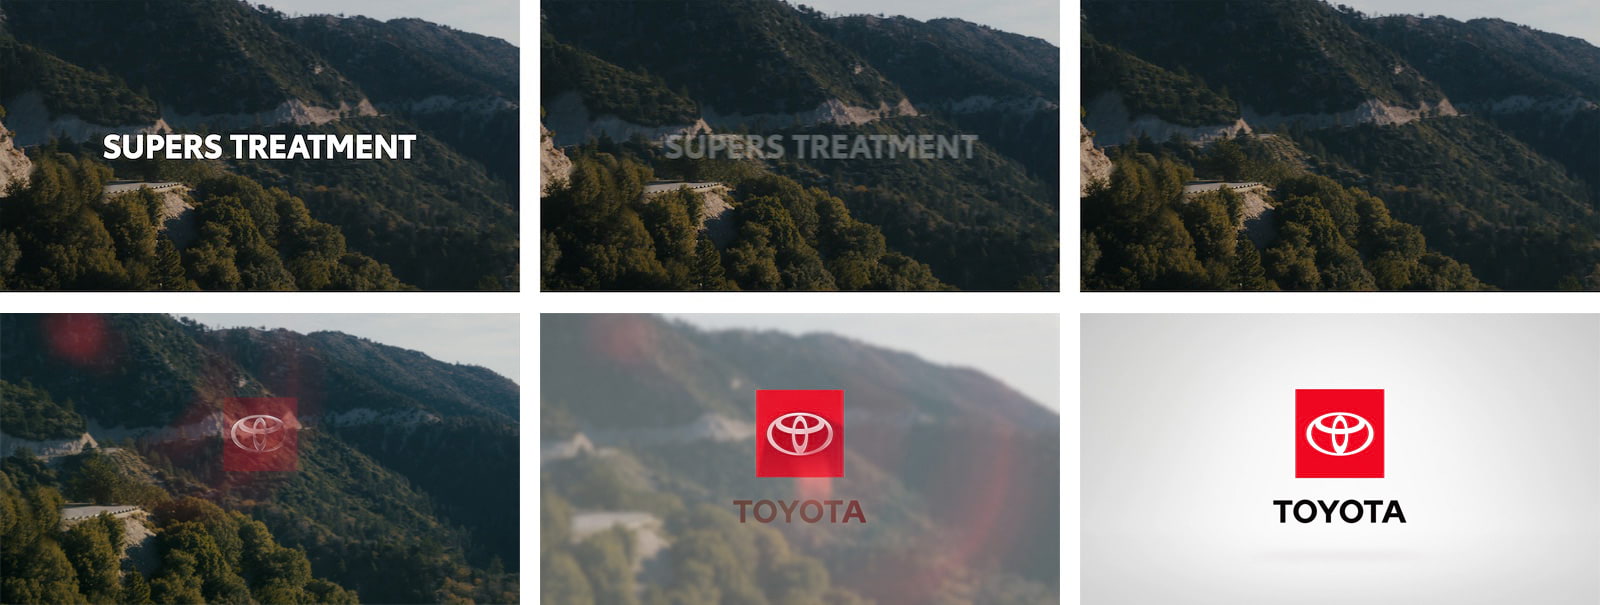 Sequence of images showing supers fading out and end tag logo fading on